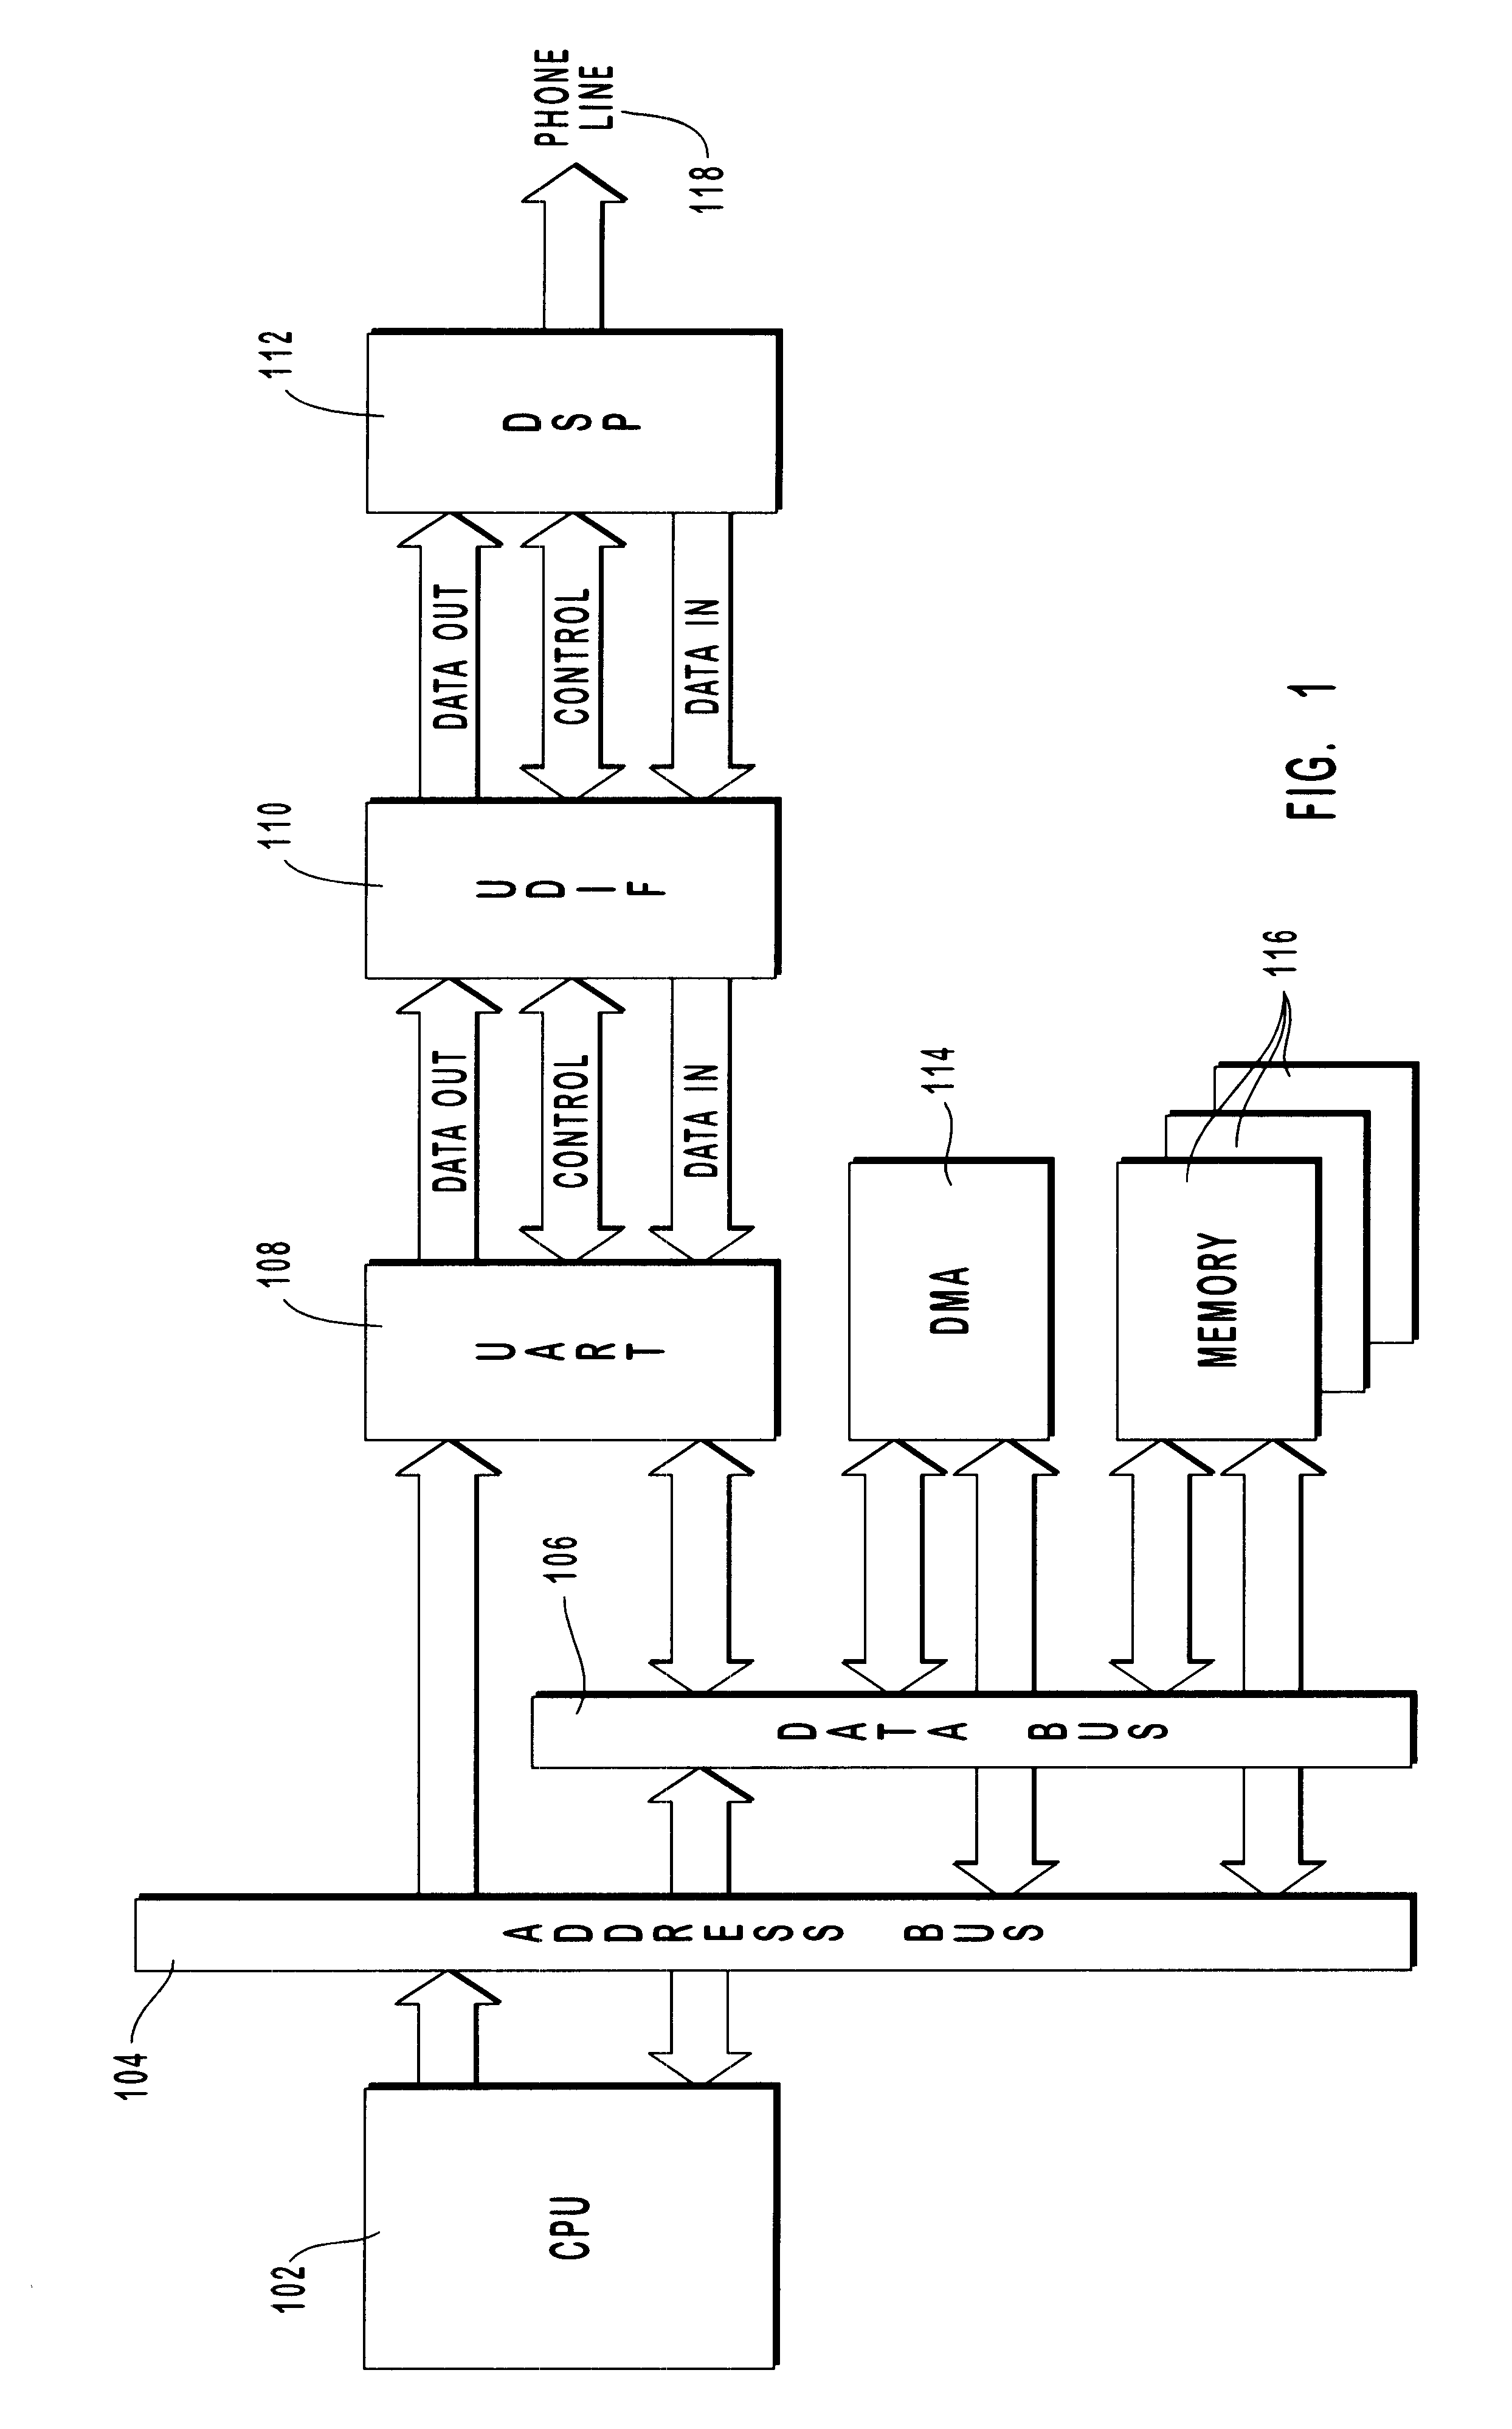 High throughput UART to DSP interface having Dual transmit and receive FIFO buffers to support data transfer between a host computer and an attached modem